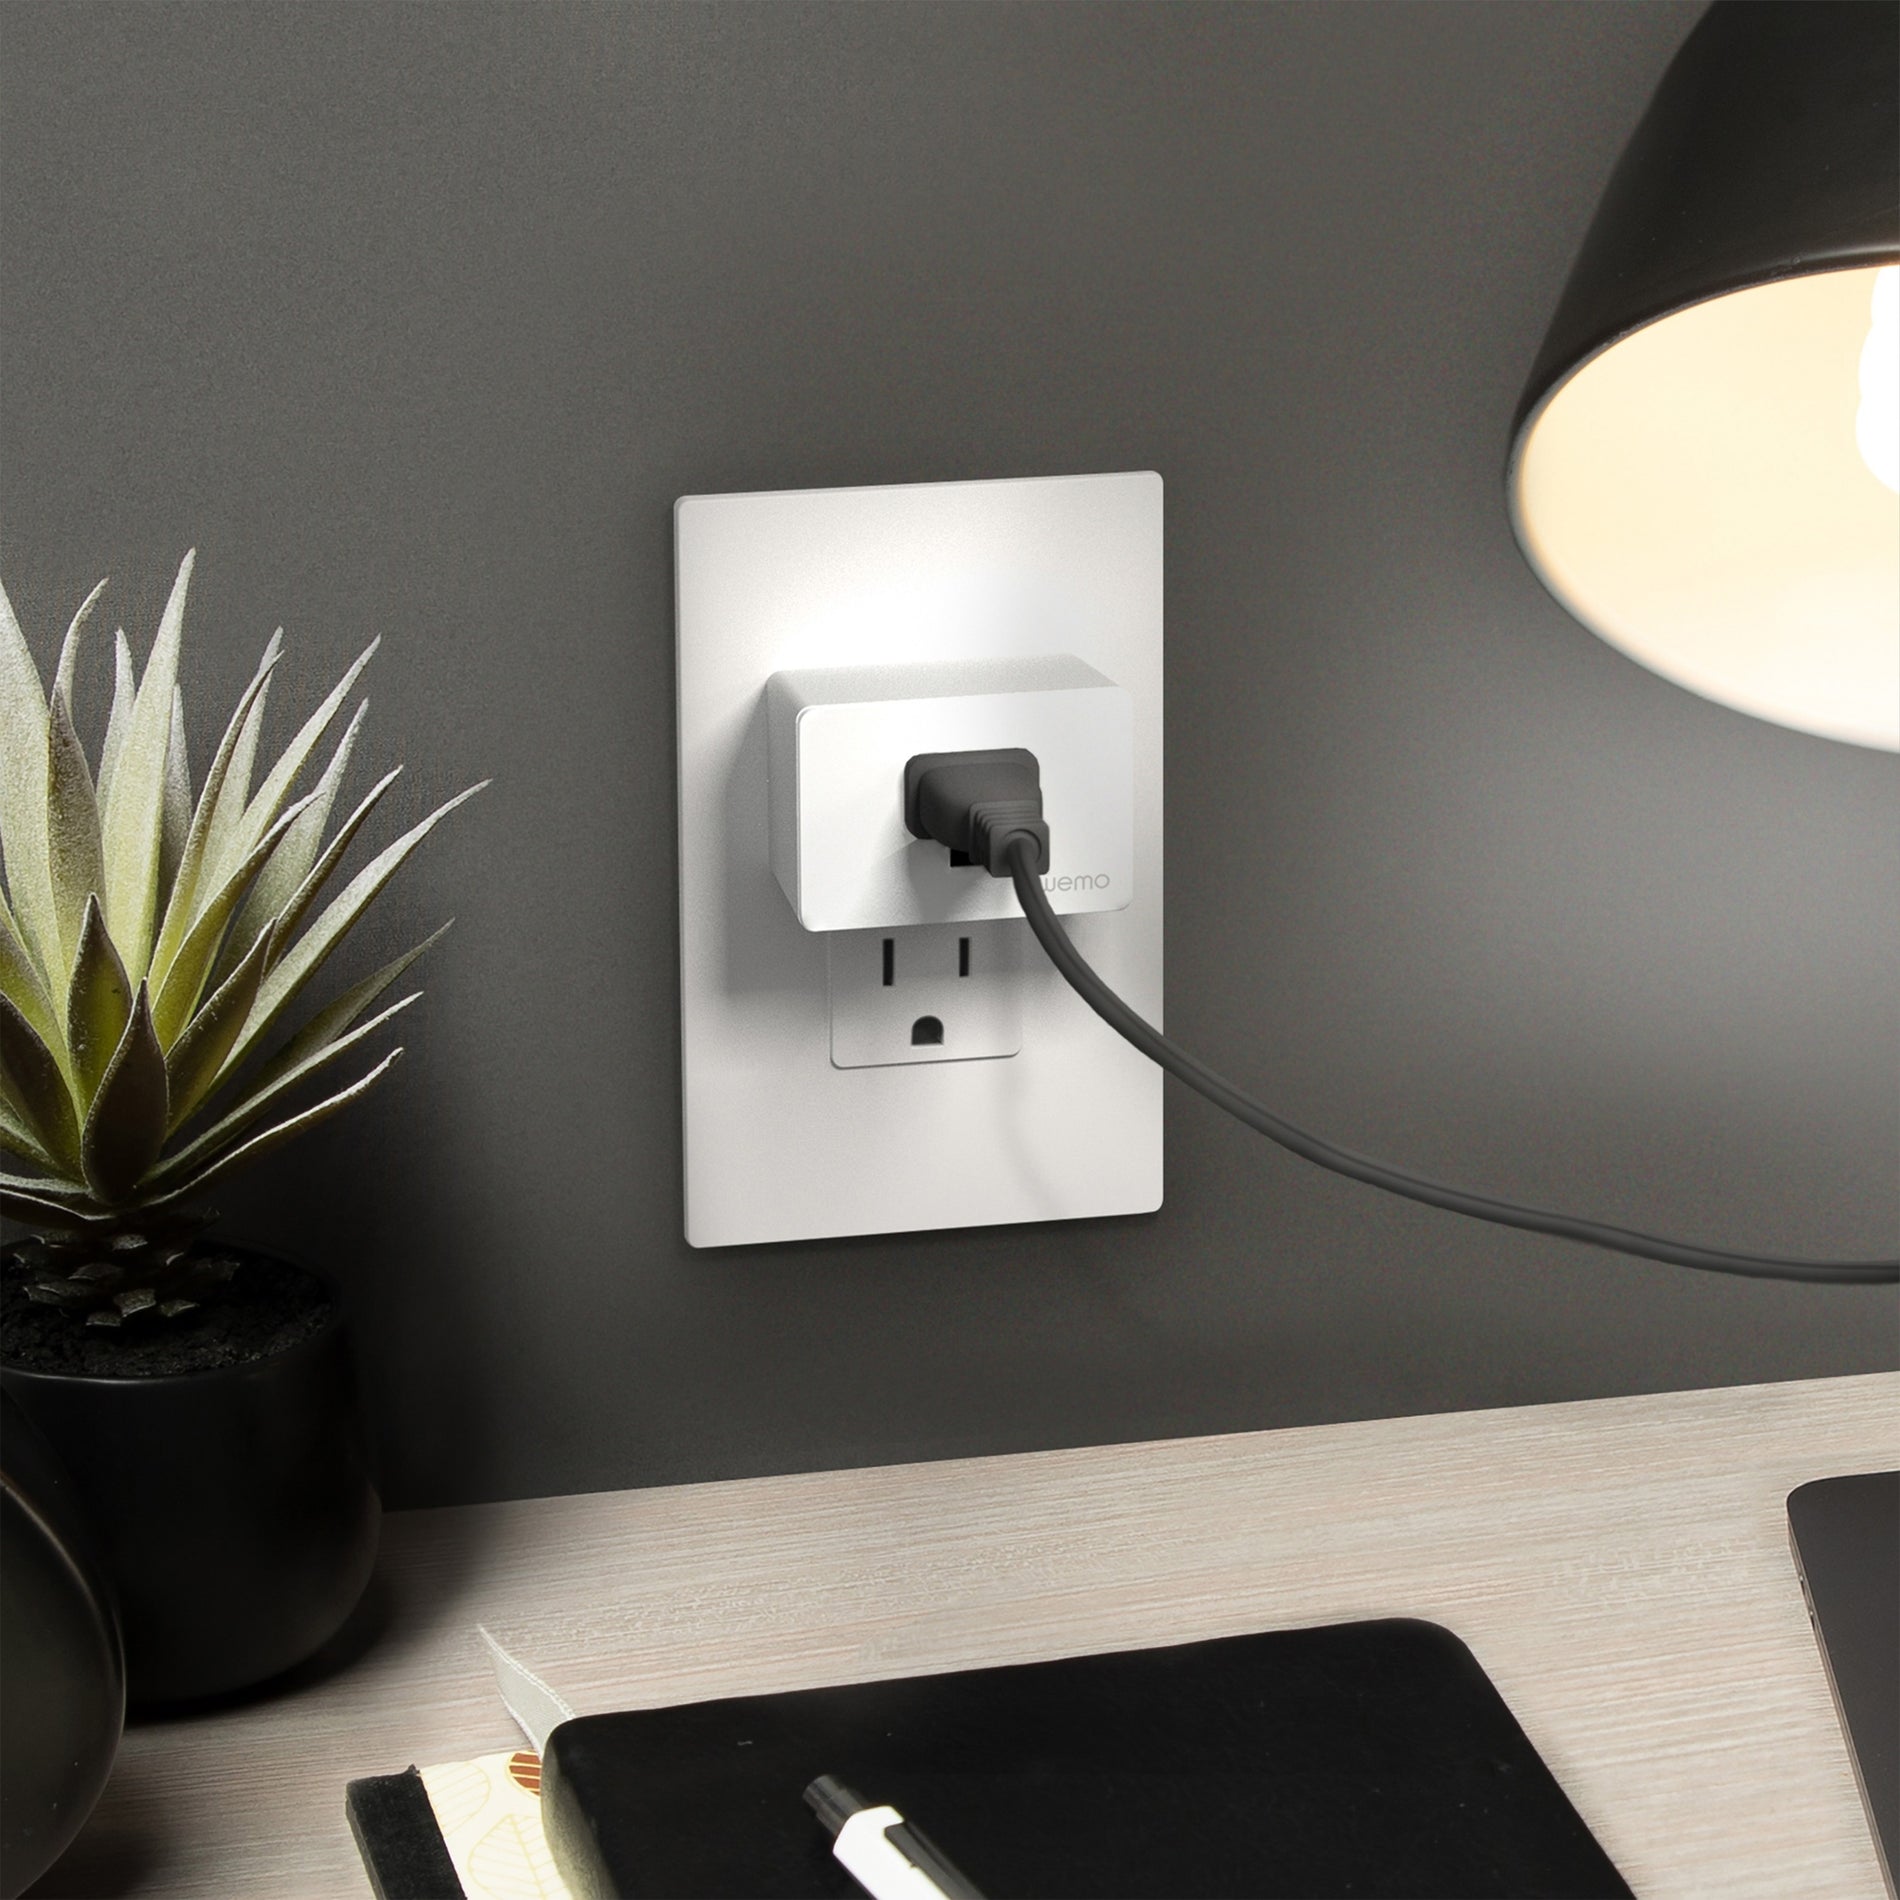 Belkin WSP080 Wemo WiFi Smart Plug, Control Your Lamps, Fans, and Disco Balls